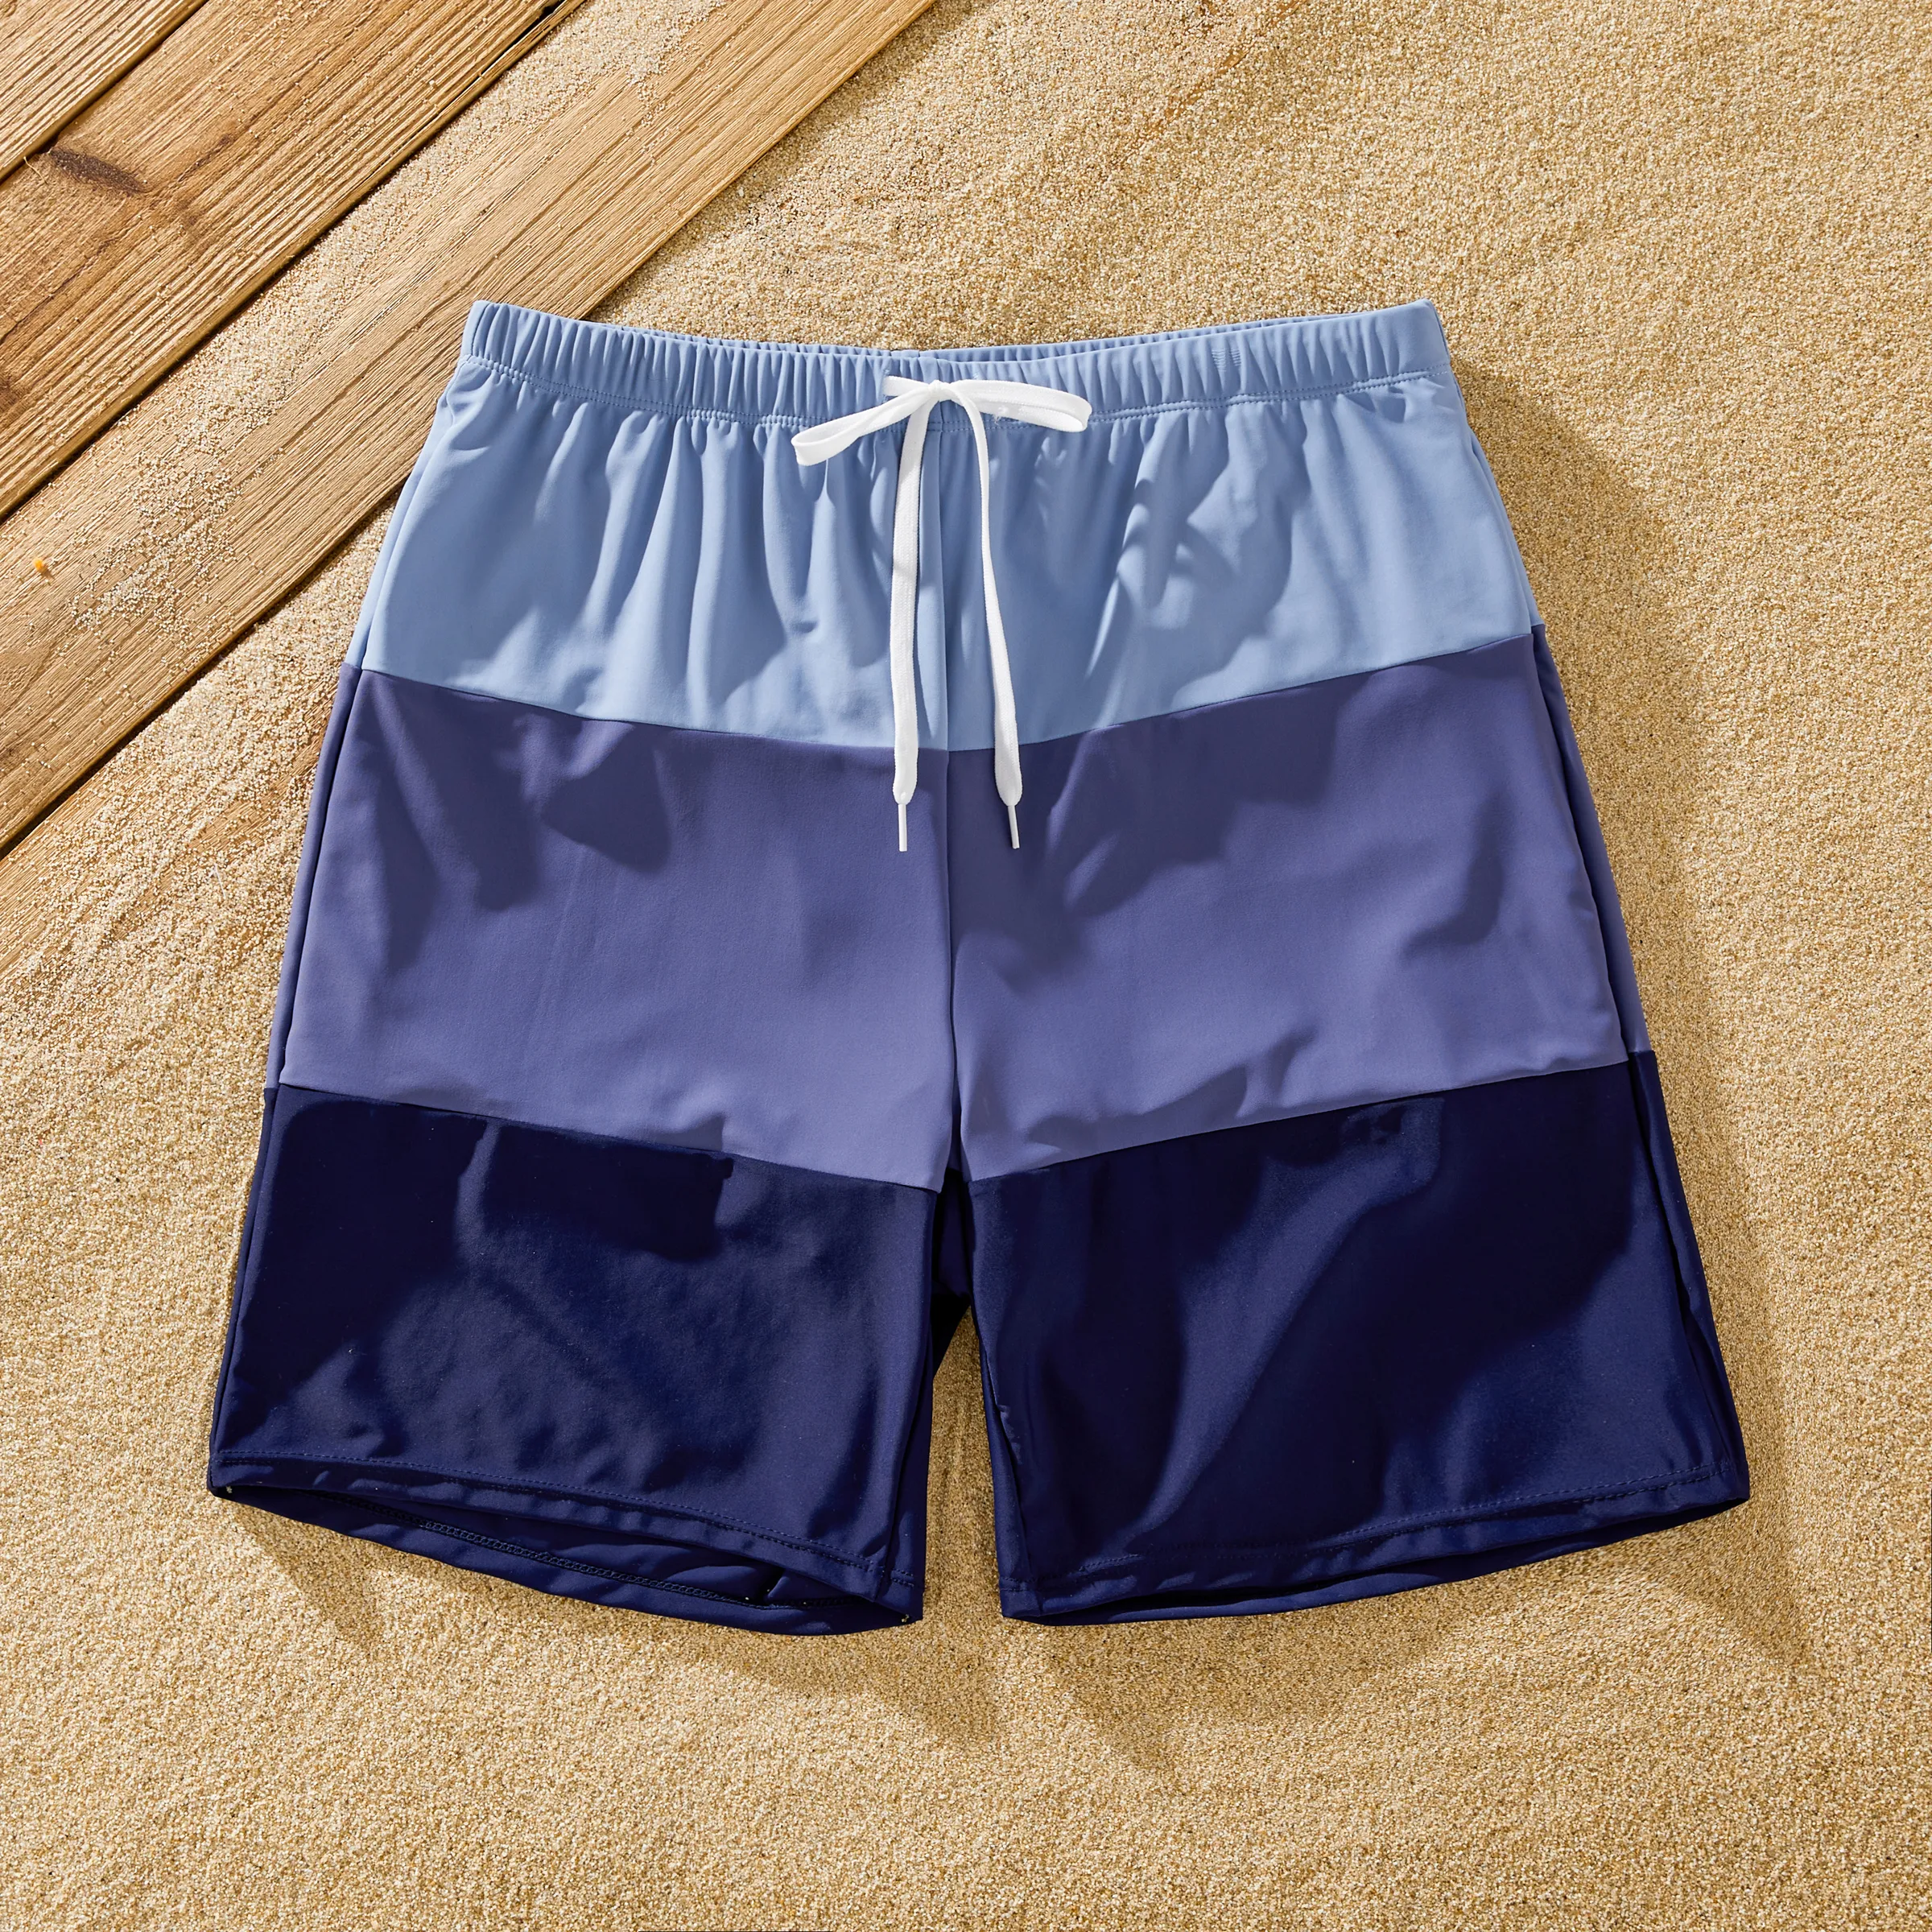 Family Matching Drawstring Swim Trunks Or Ruched Bow Tie Cut Out Mesh Ruffle Strap Swimsuit